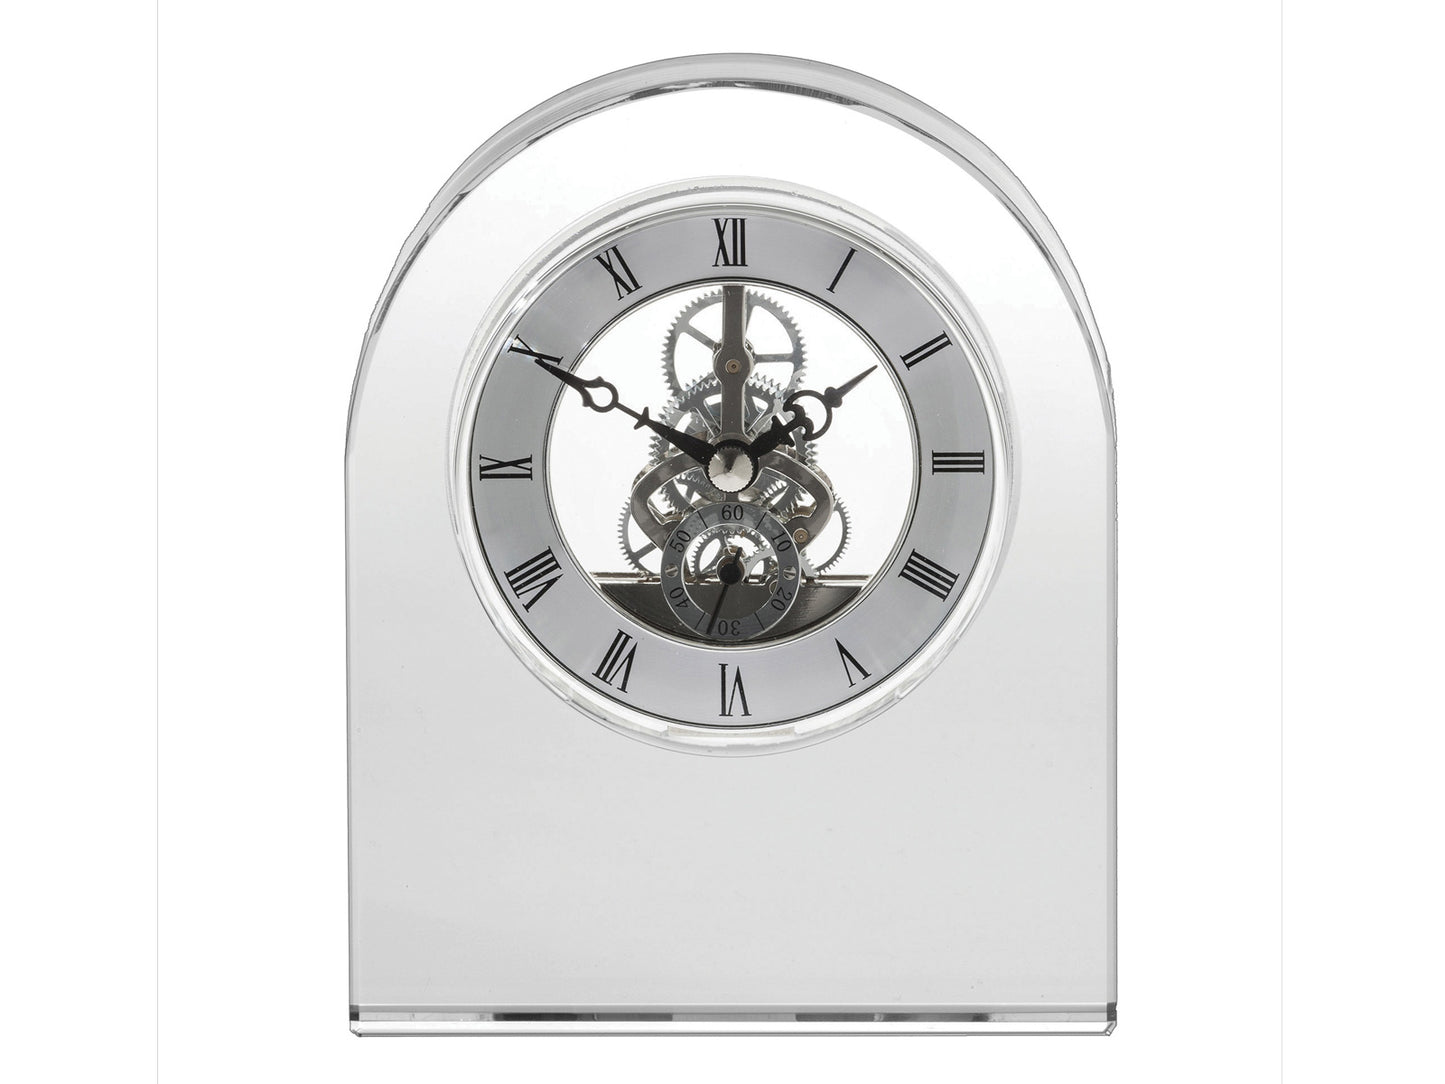 A large crystal clock with a silver face with exposed mechanical workings.